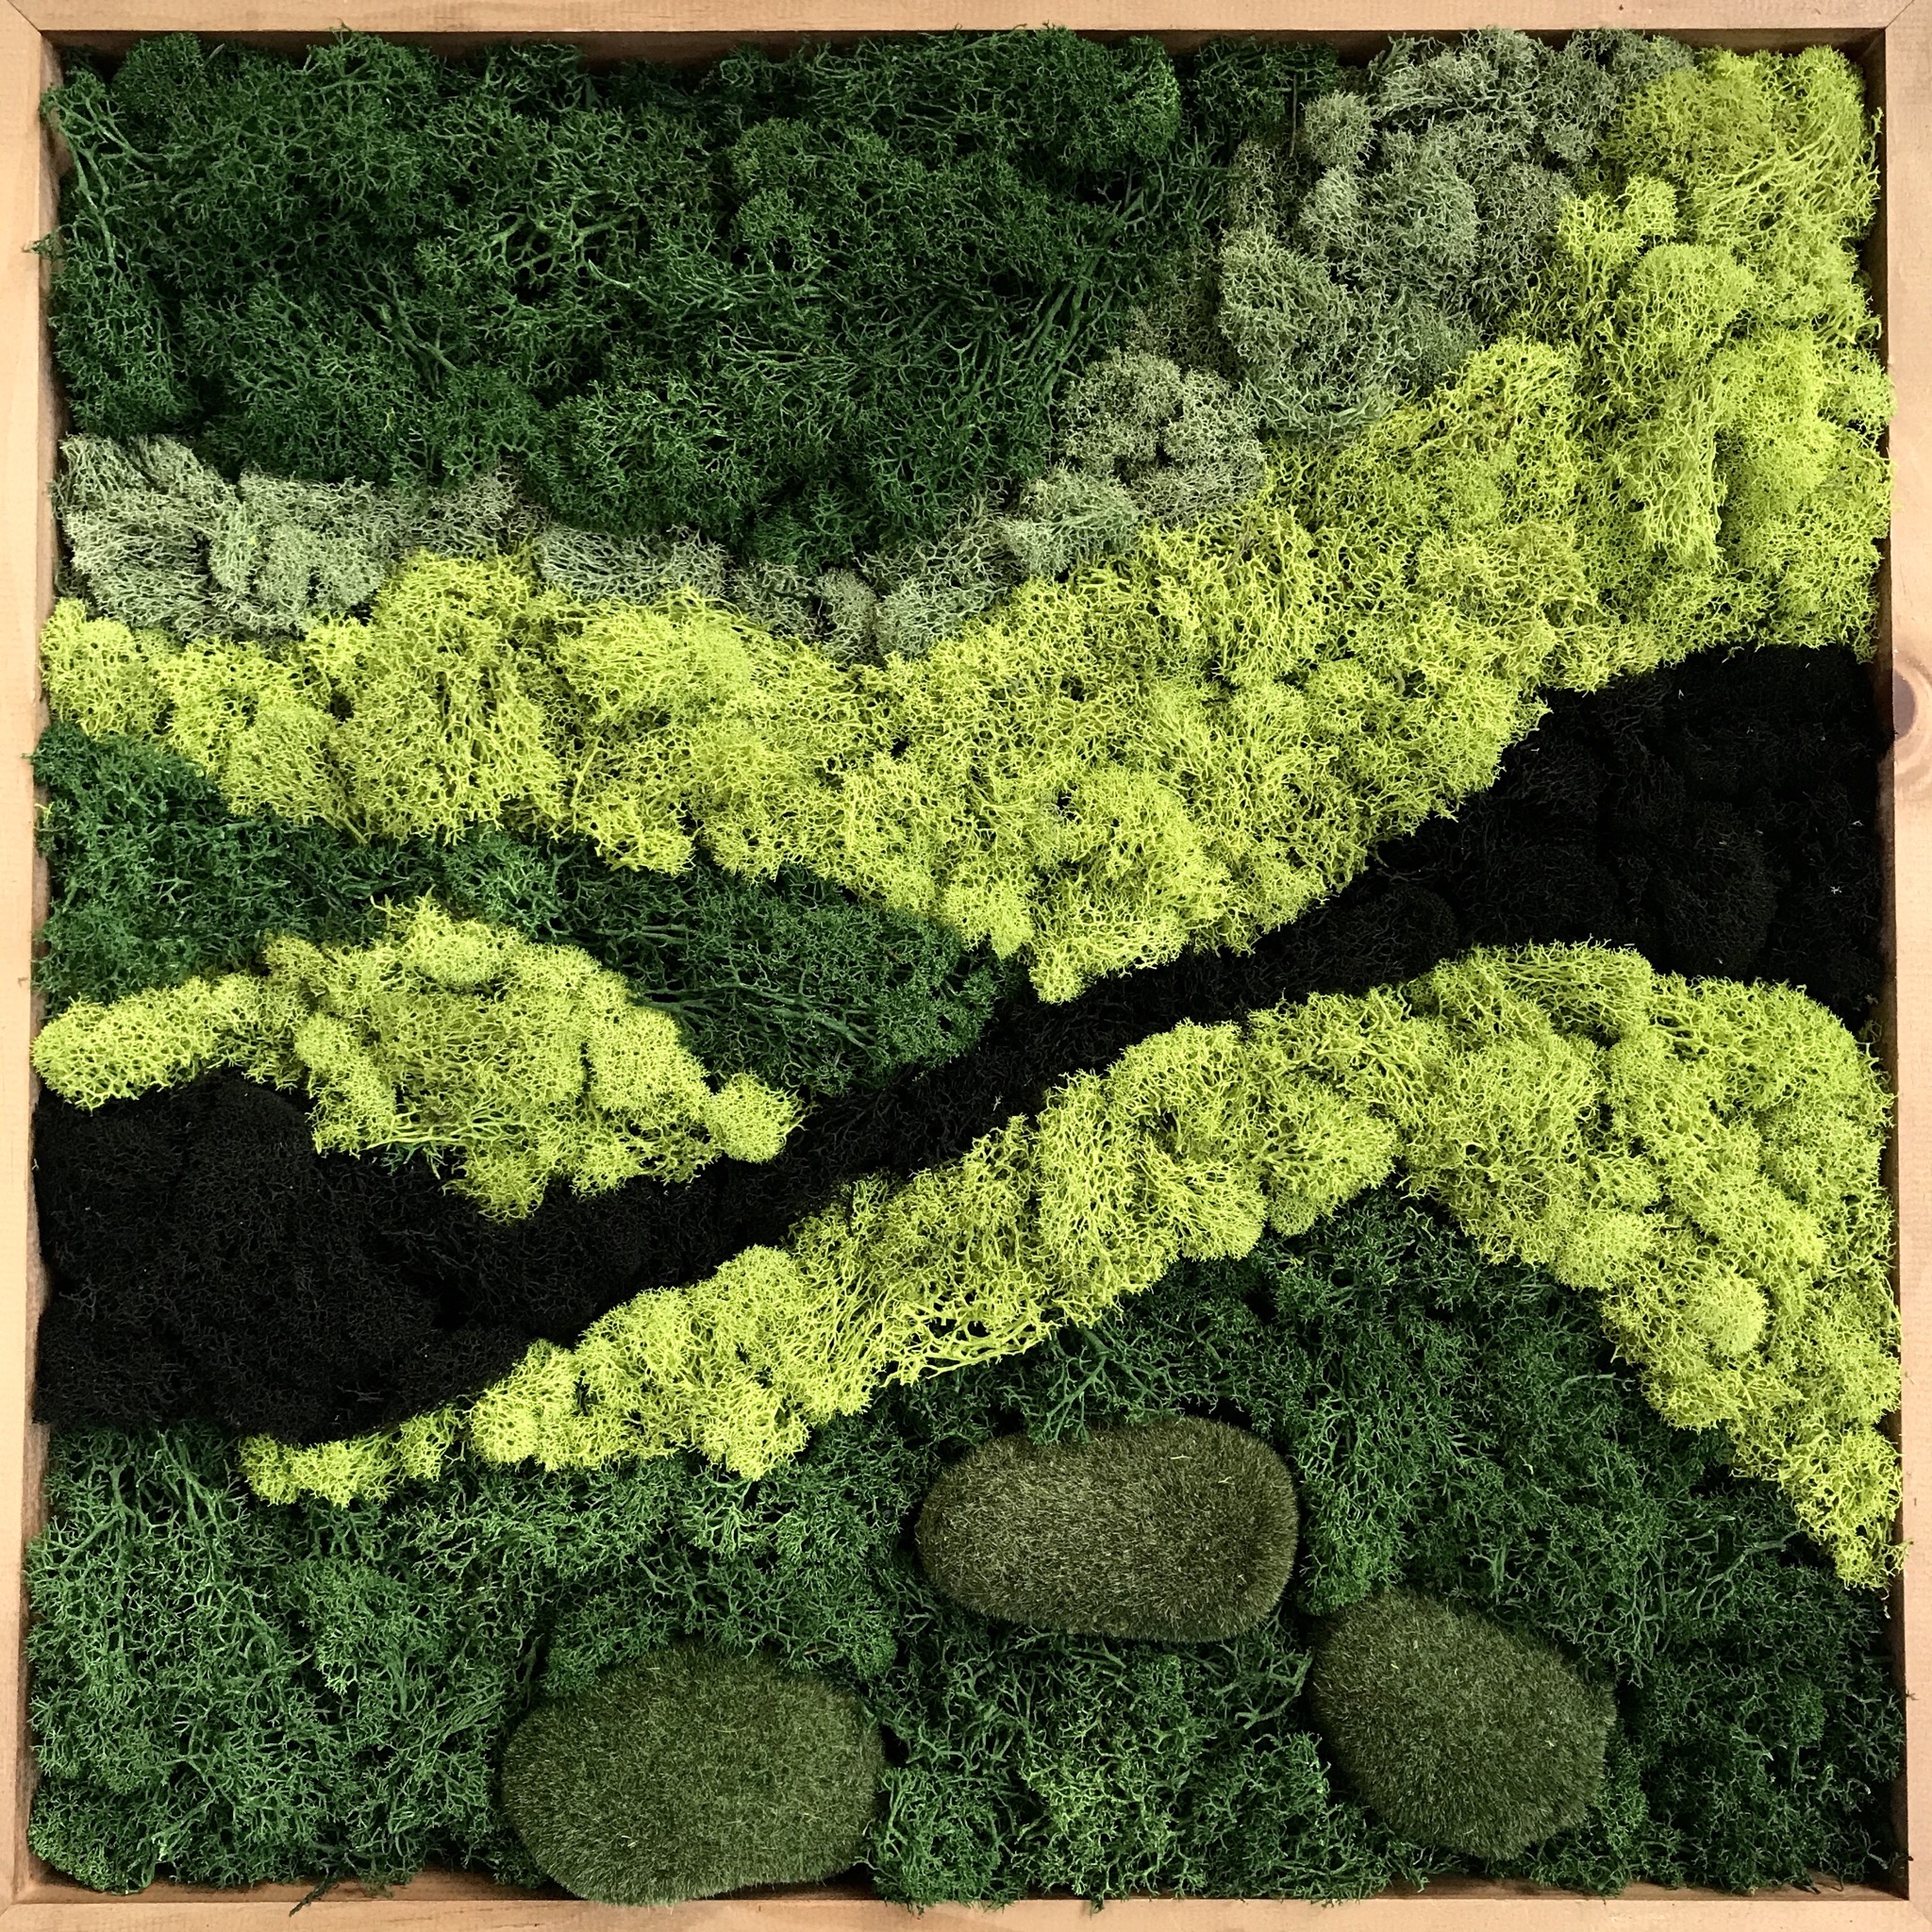 Phipps Conservatory and Botanical Gardens on X: Join us on Jan. 30 to  create your very own moss shadowbox! Moss art brings the beauty and texture  of nature into your home during